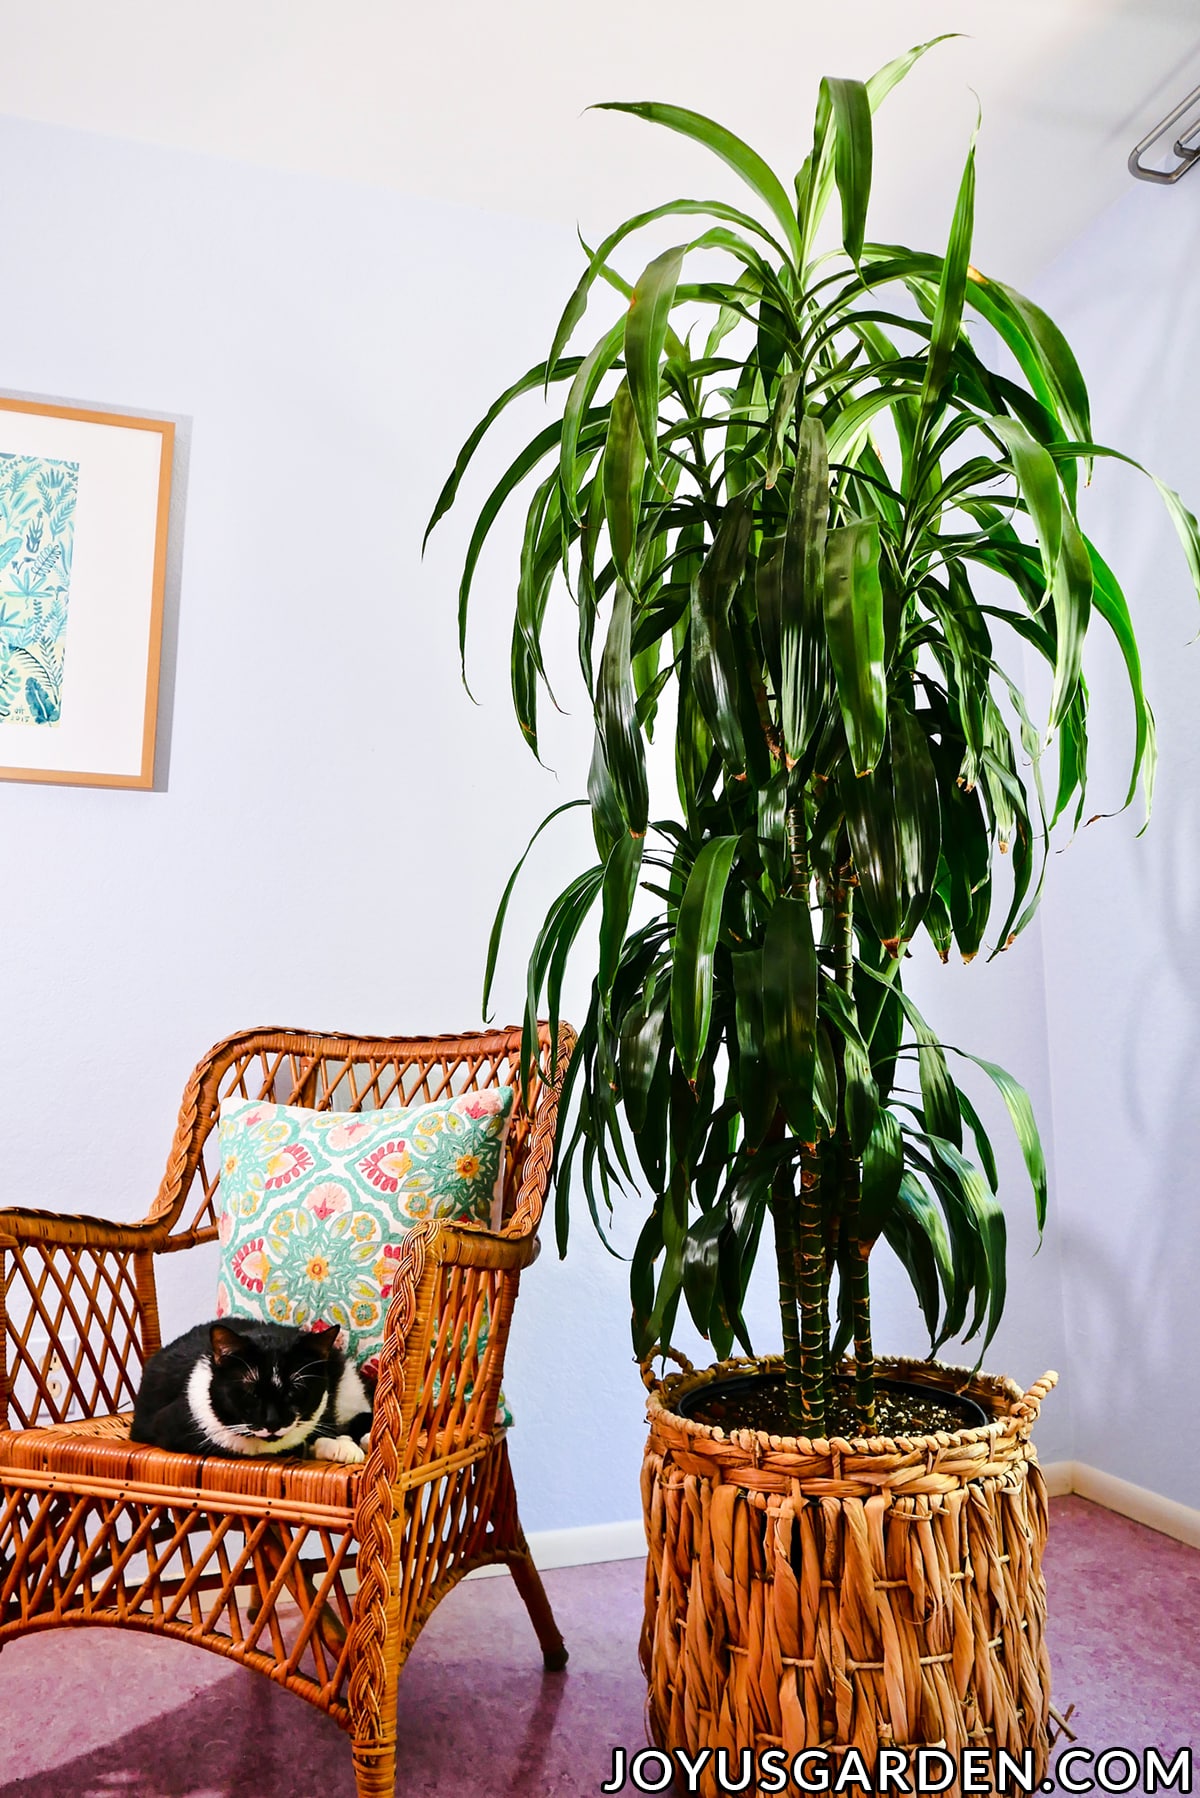 a large dracaena plant with dark glossy green leaves grows in a basket next to a black & white cat in a chair